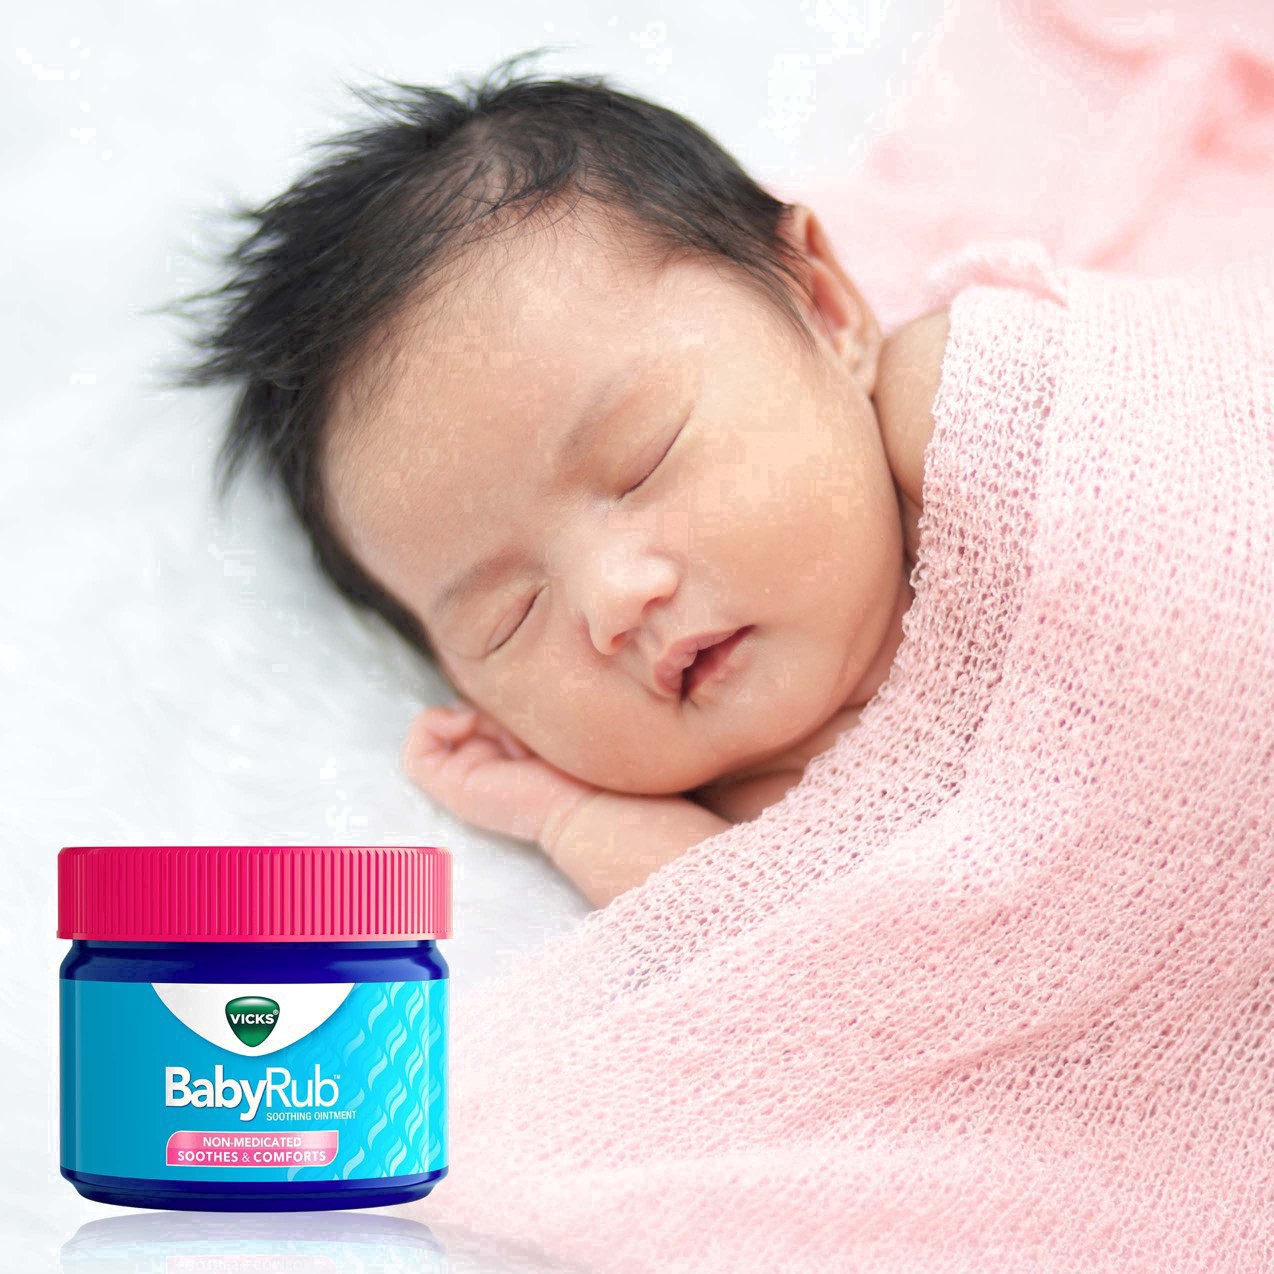 slide 21 of 78, Vicks BabyRub, Chest Rub Ointment with Soothing Aloe, Eucalyptus, Lavender, and Rosemary, from The Makers of VapoRub, 1.76 oz, 1.76 oz